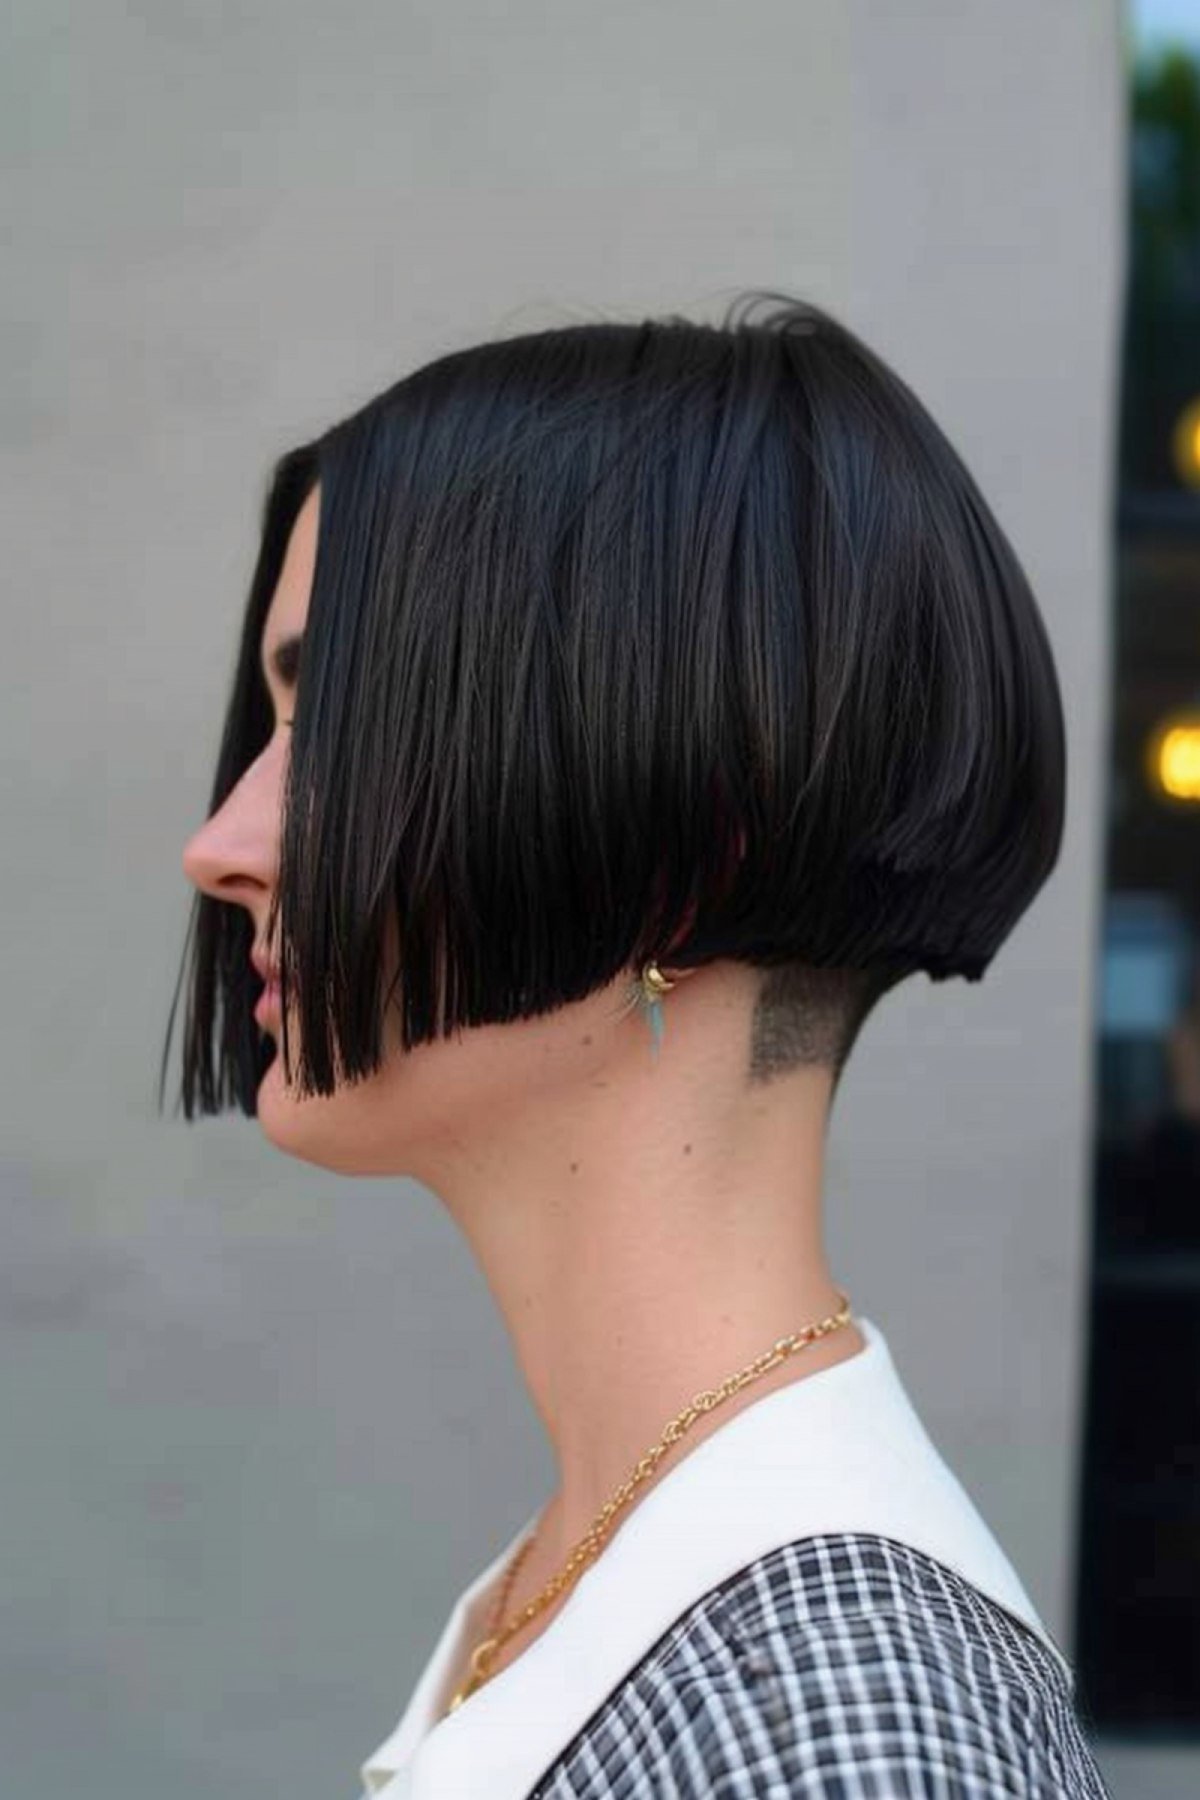 Short Bob Hairstyle with Clean Nape Undercut for Young Woman